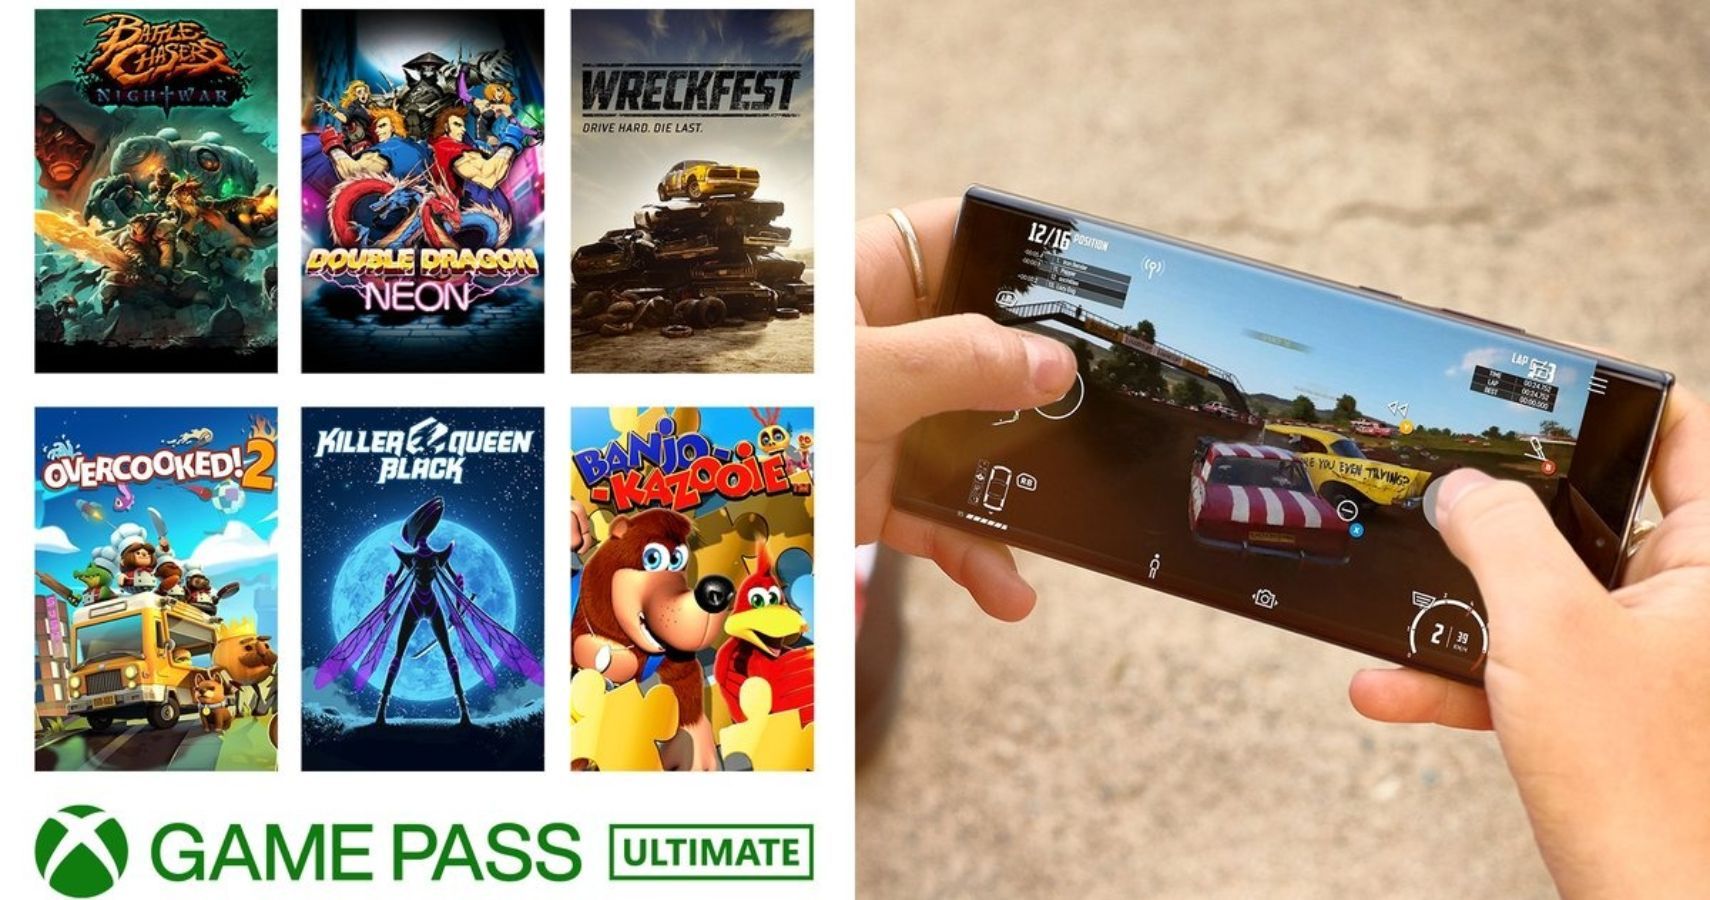 Xbox Game Pass now has more than 100 touch-enabled games - The Verge